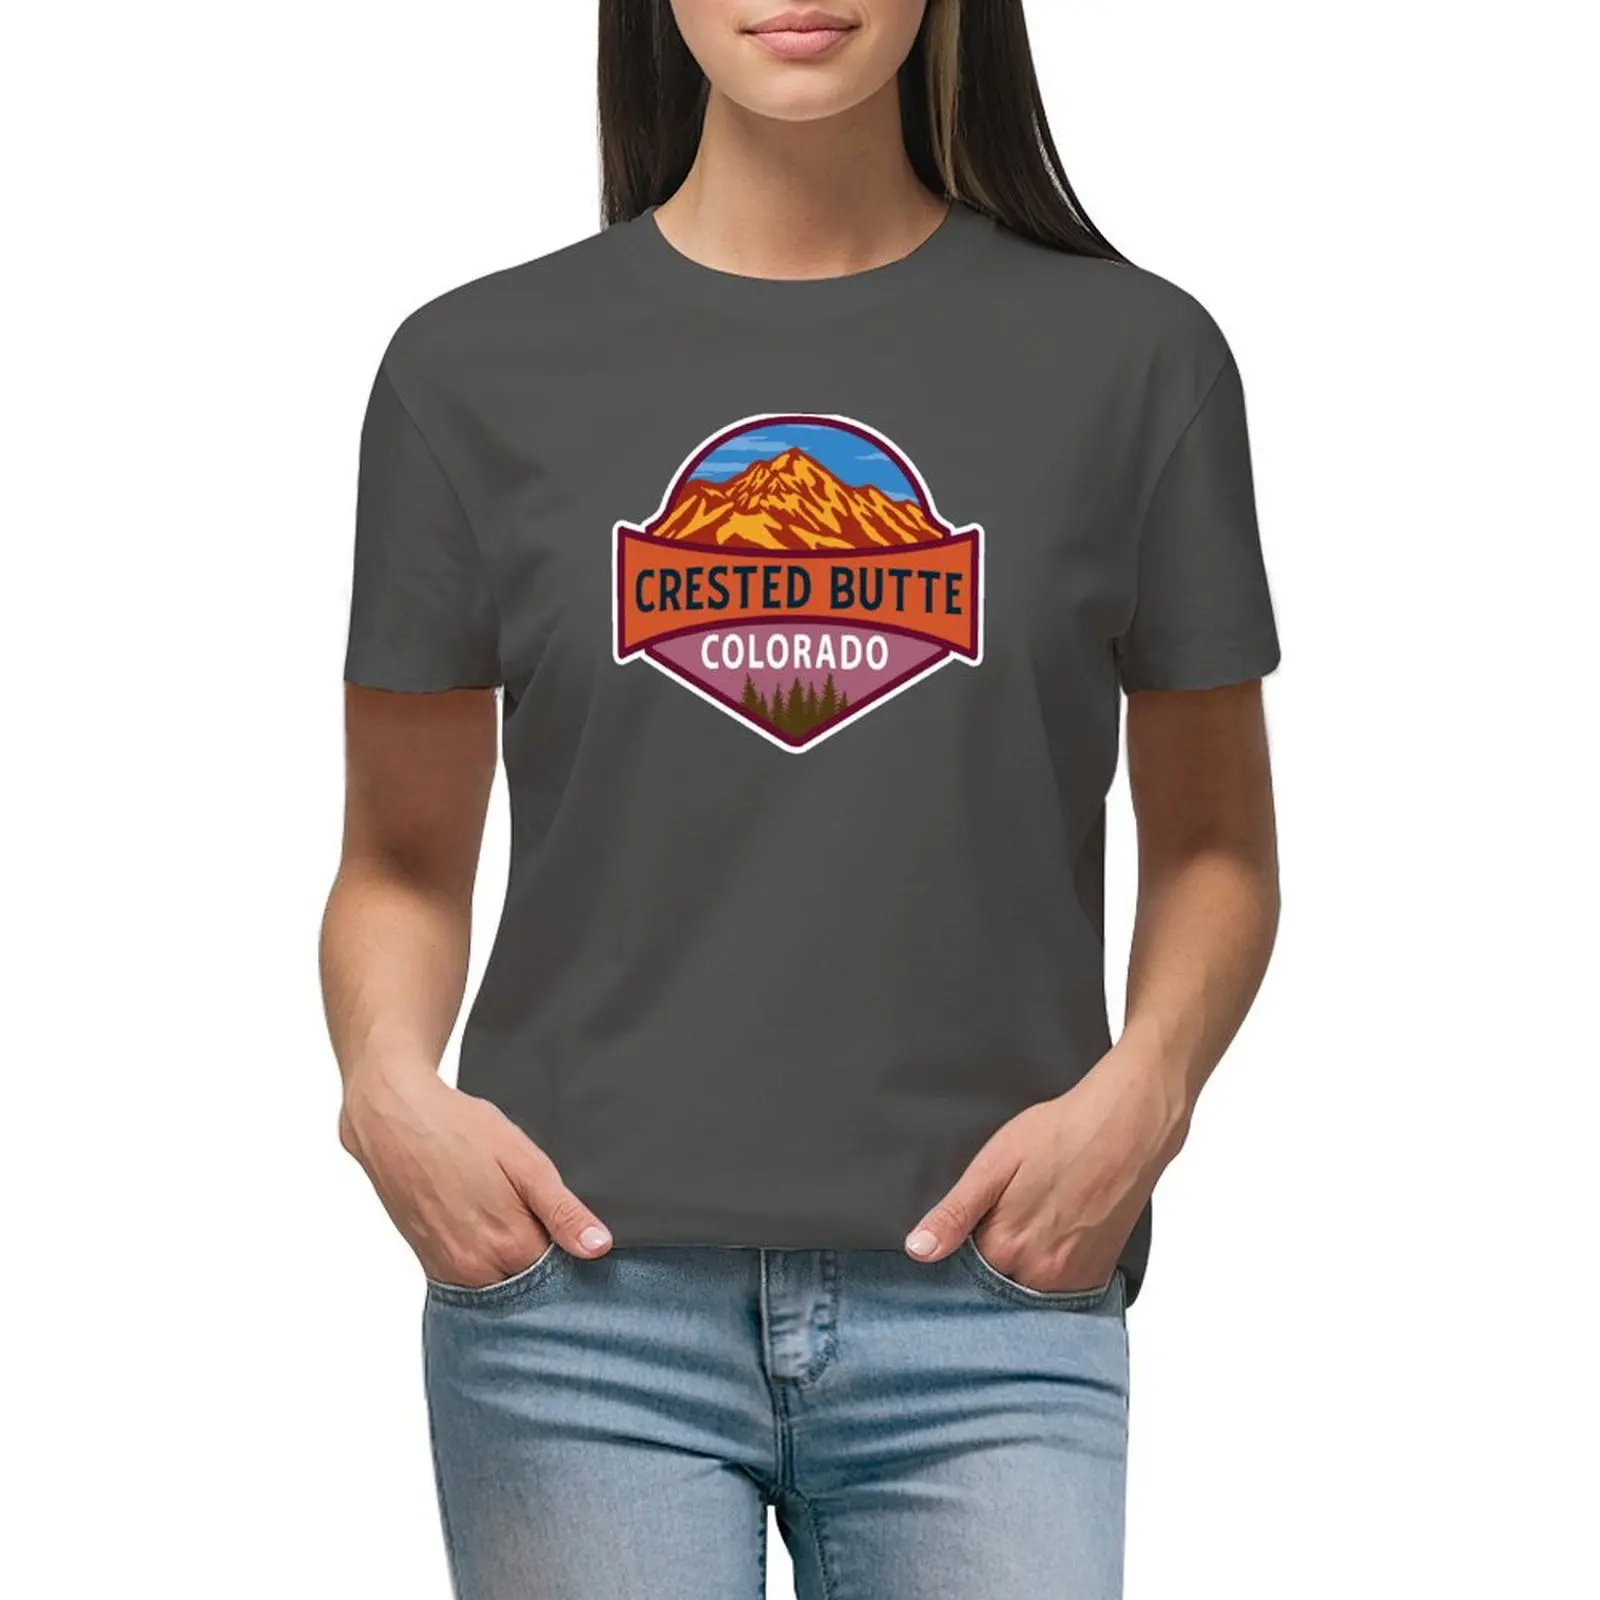 Crested Butte Colorado T-shirt cute tops aesthetic clothes shirts graphic tees cropped t shirts for Women